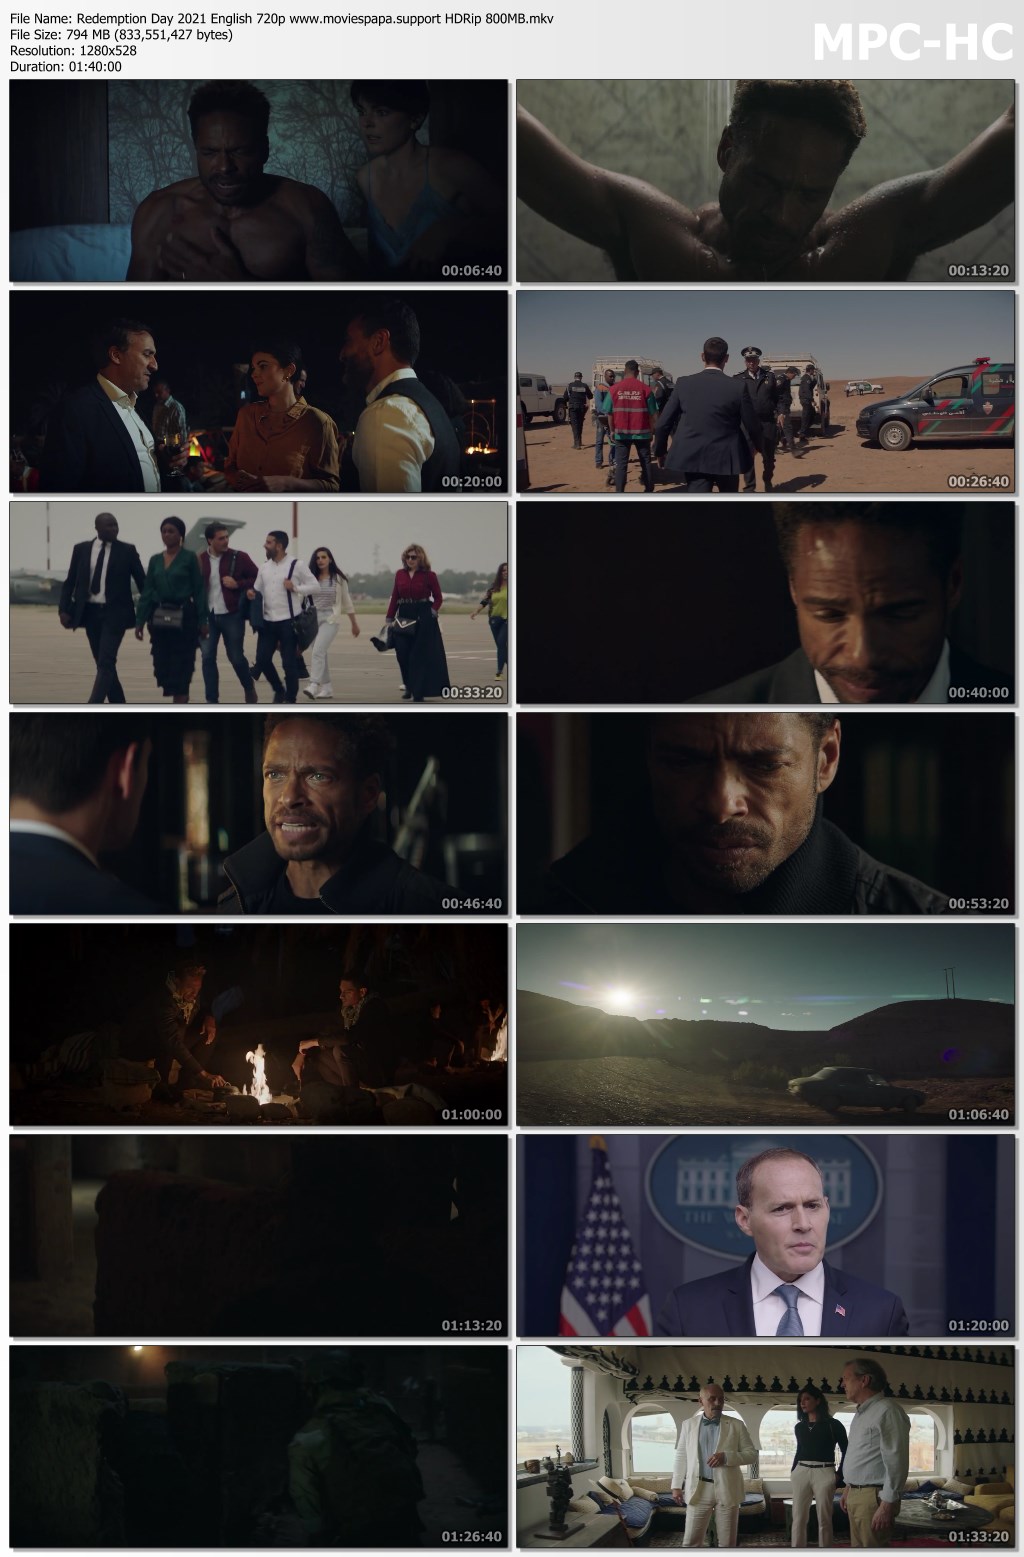 Redemption Day 21 English 7p Hdrip 800mb Download 9xmoviehd Com